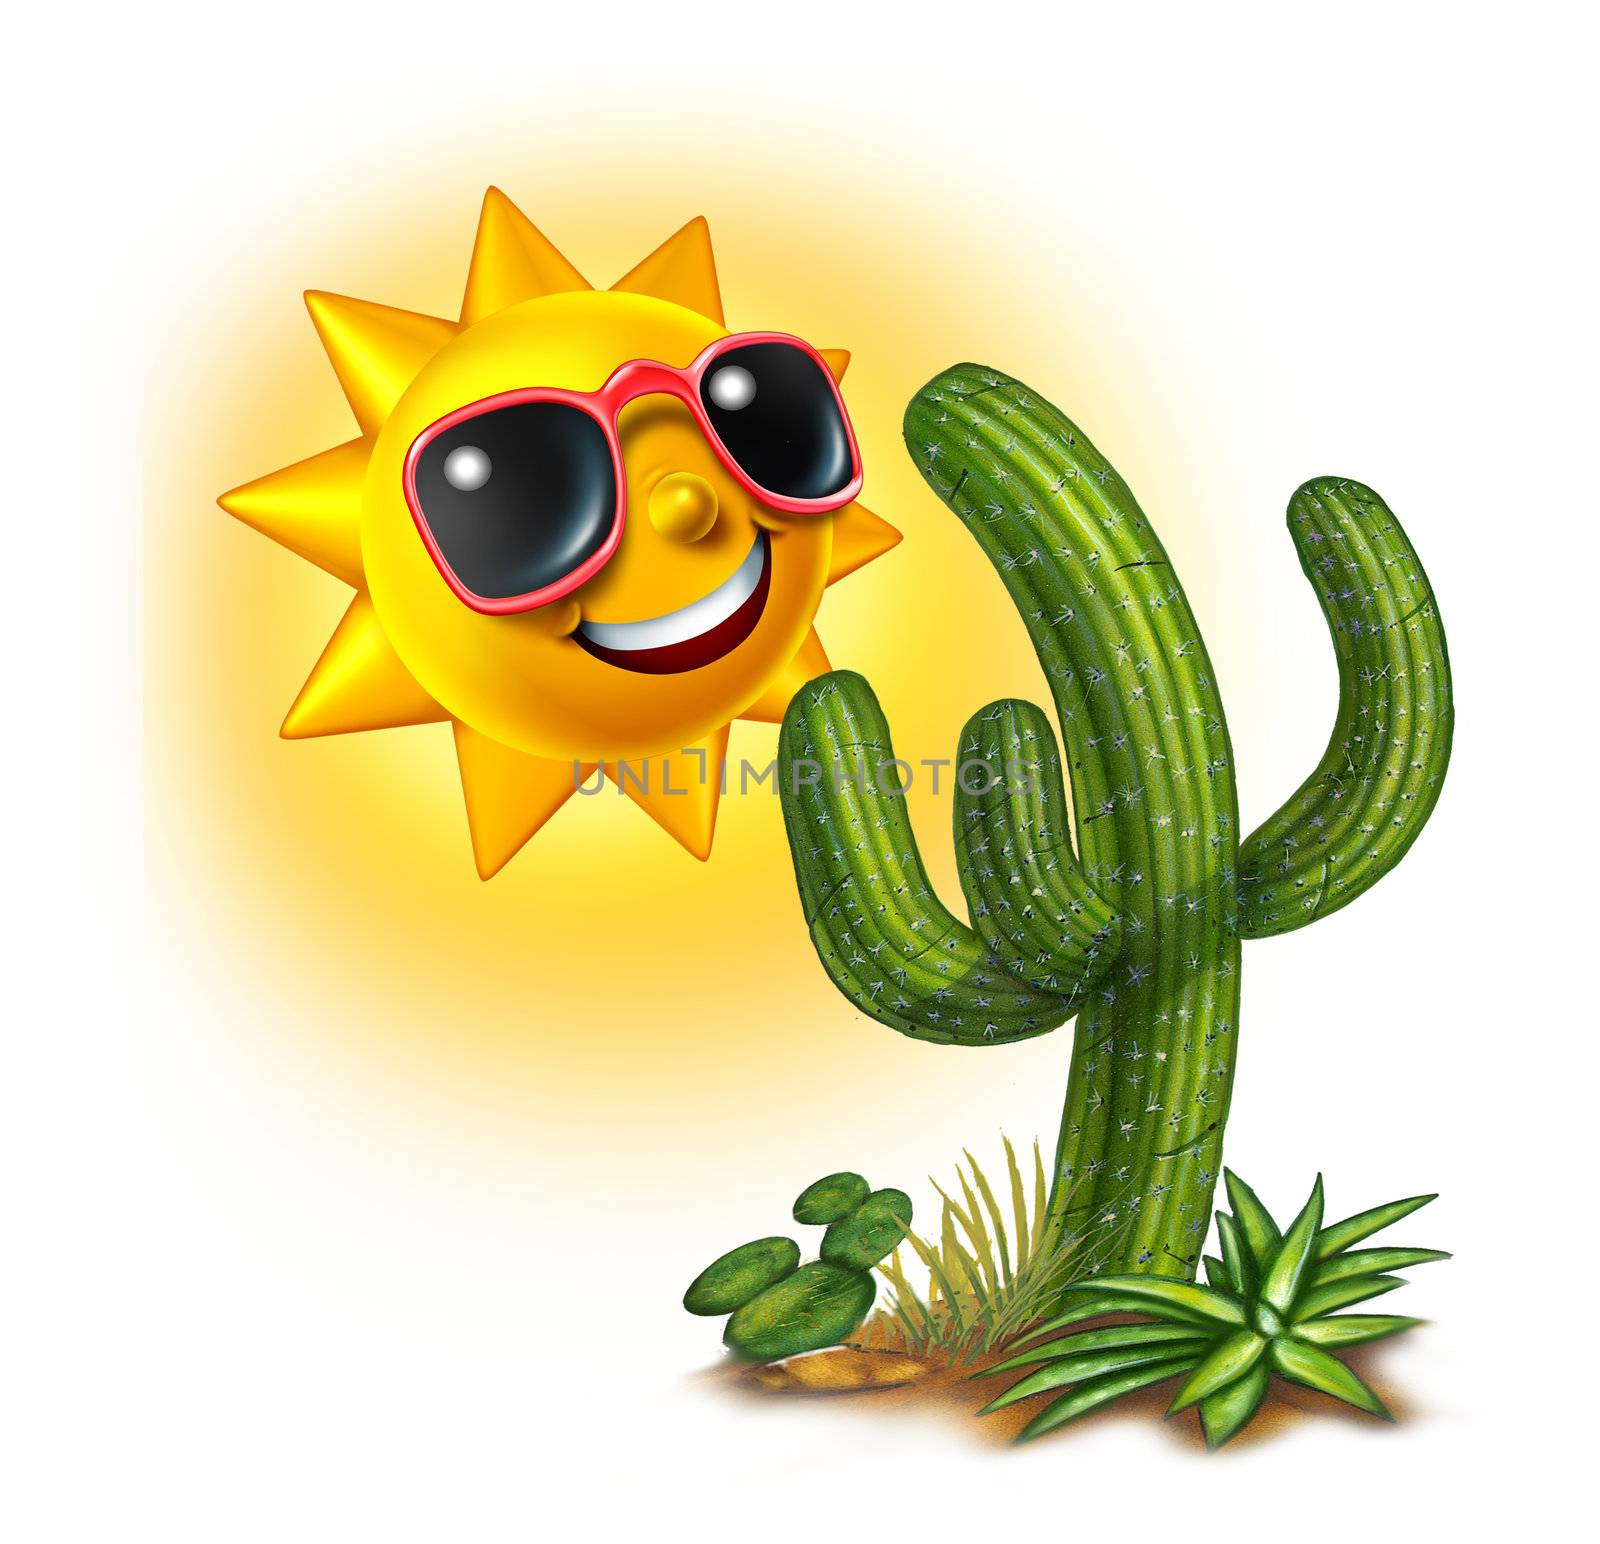 Cactus And Sun by brightsource